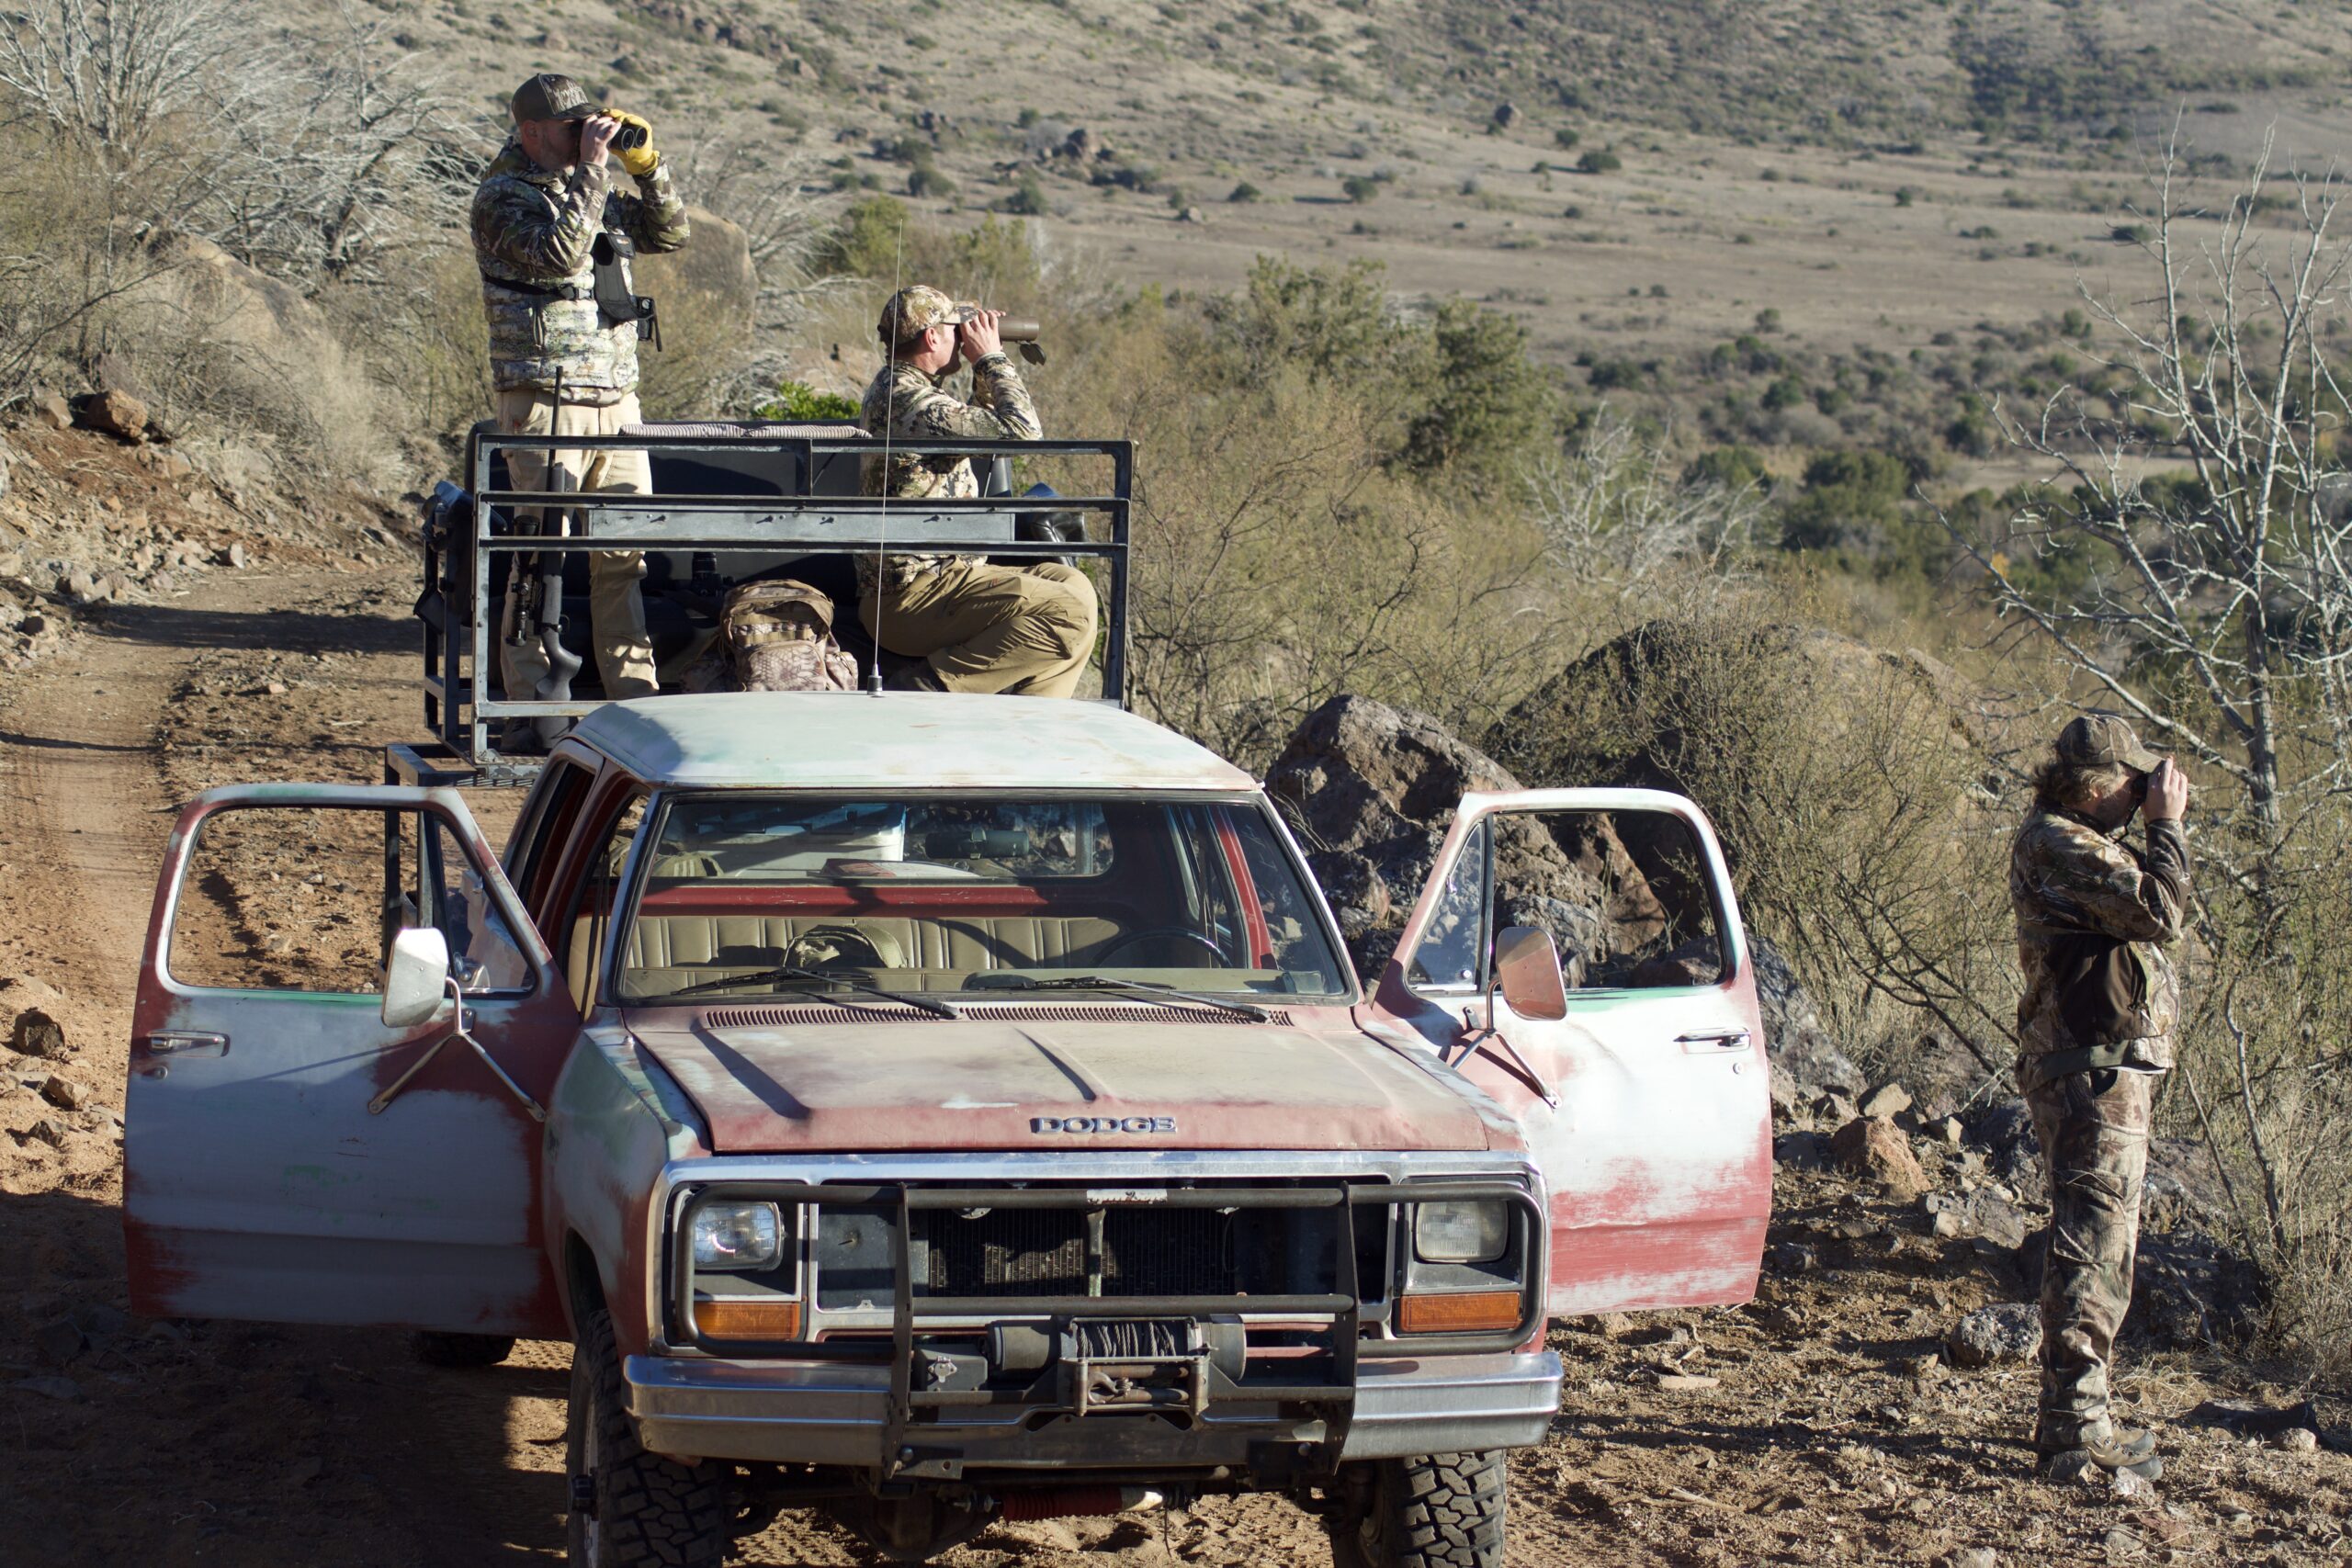 An old Dodge Ram is perfect for remote hunting.